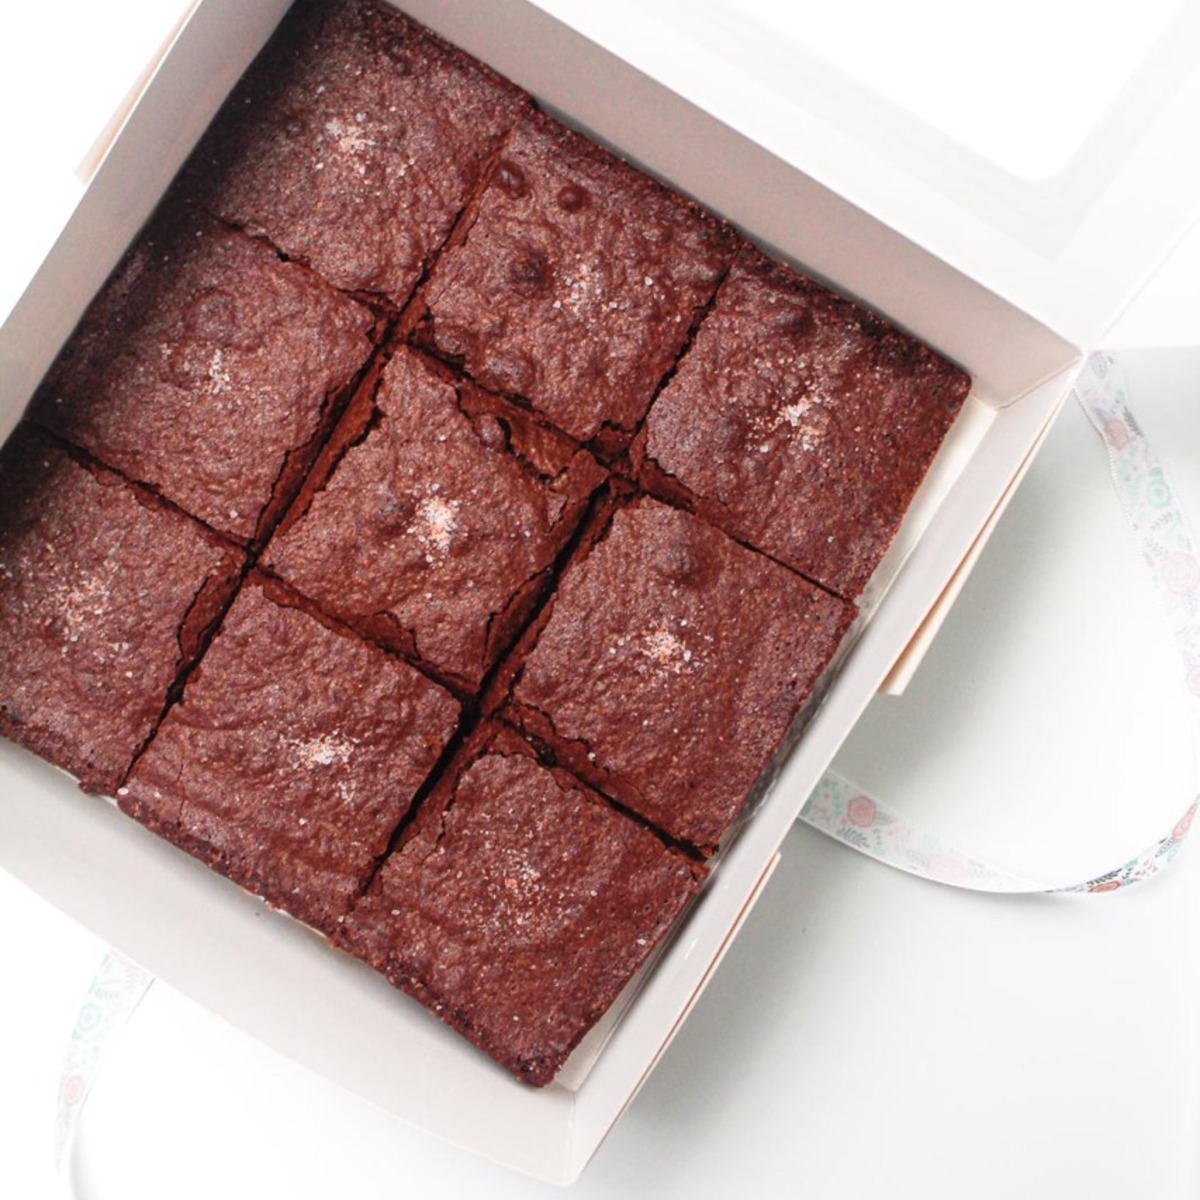 Stand a chance to win brownies from Lexygracebakes!